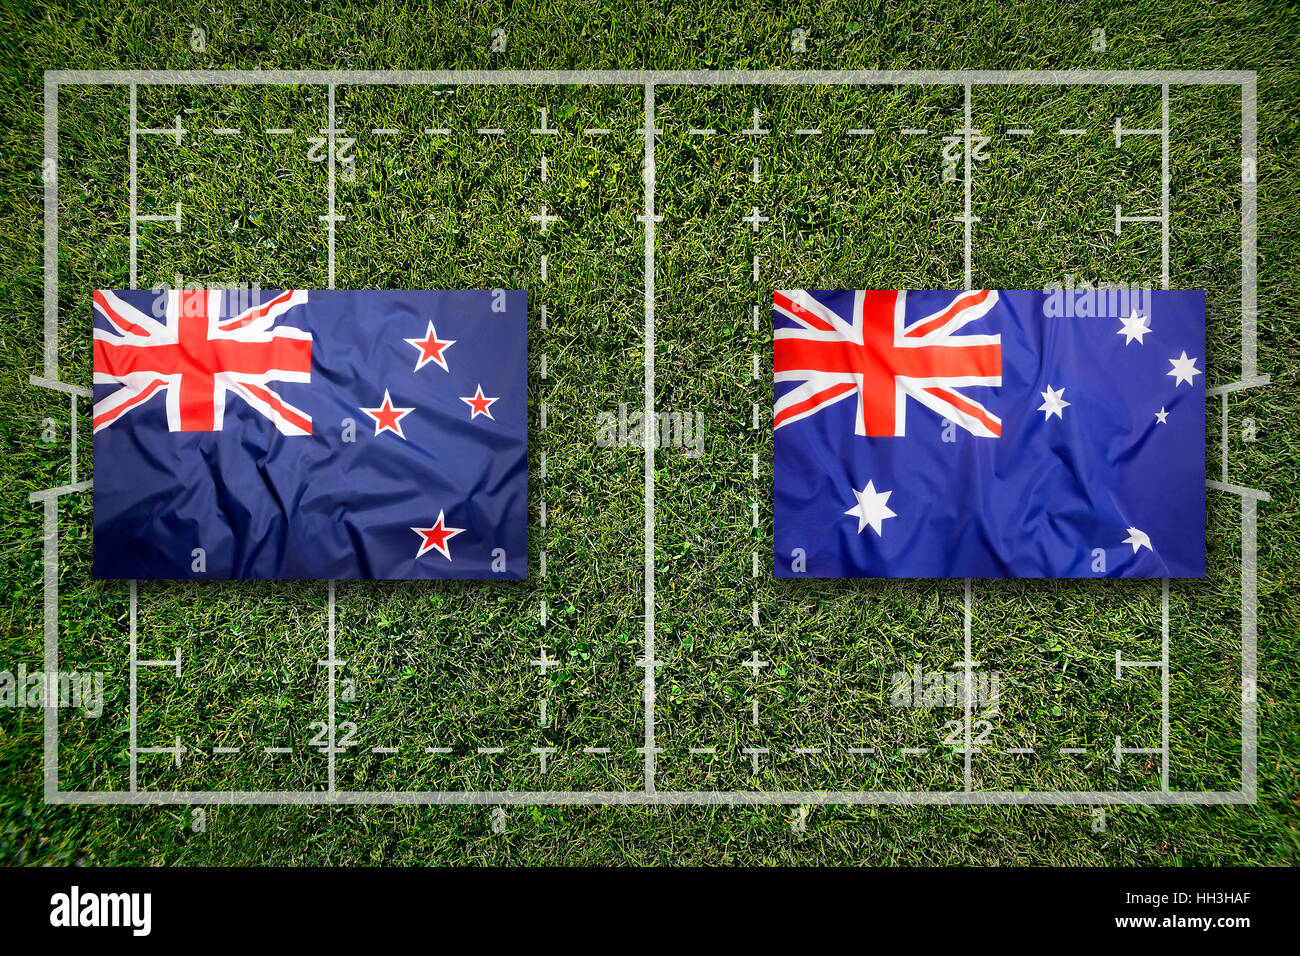 Australia New Zealand Flag High Resolution Stock Photography and Images -  Alamy